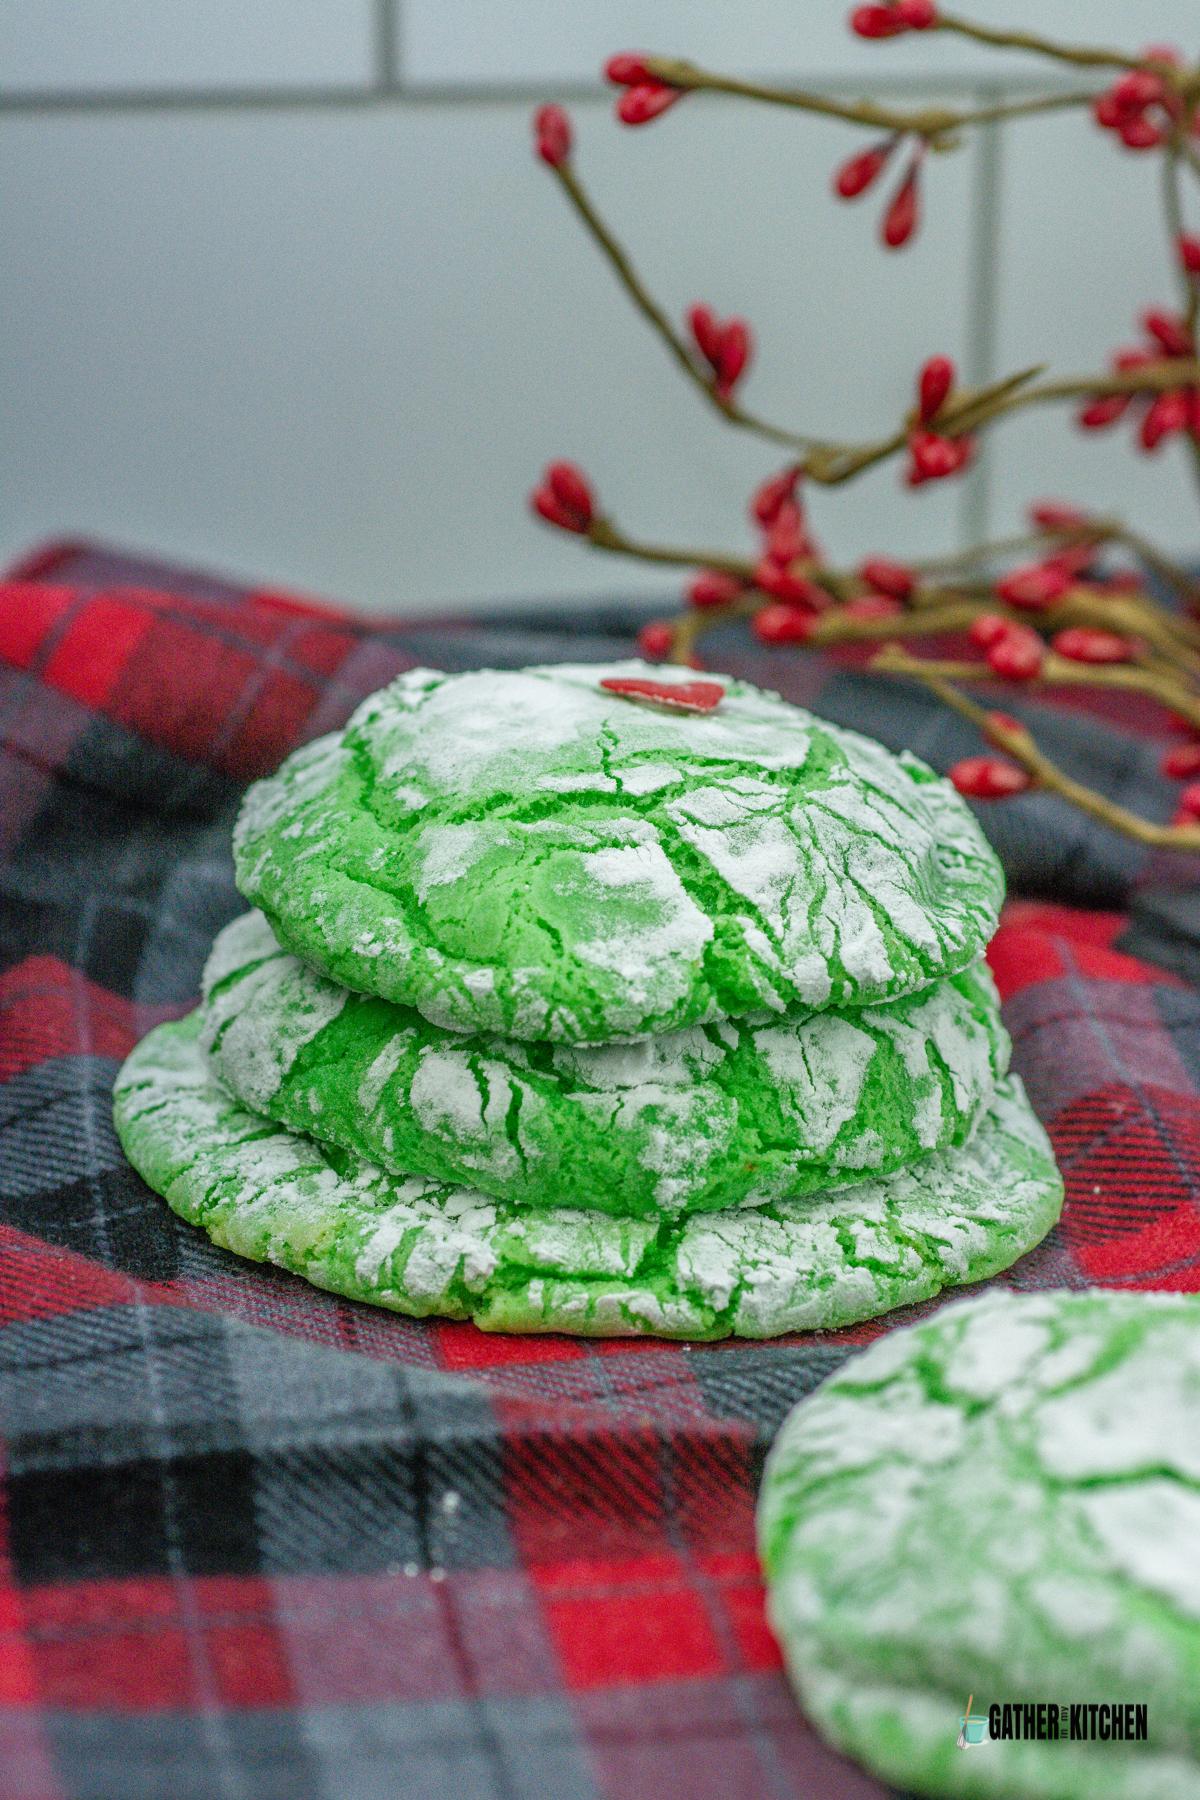 A pile of Grinch cookies.